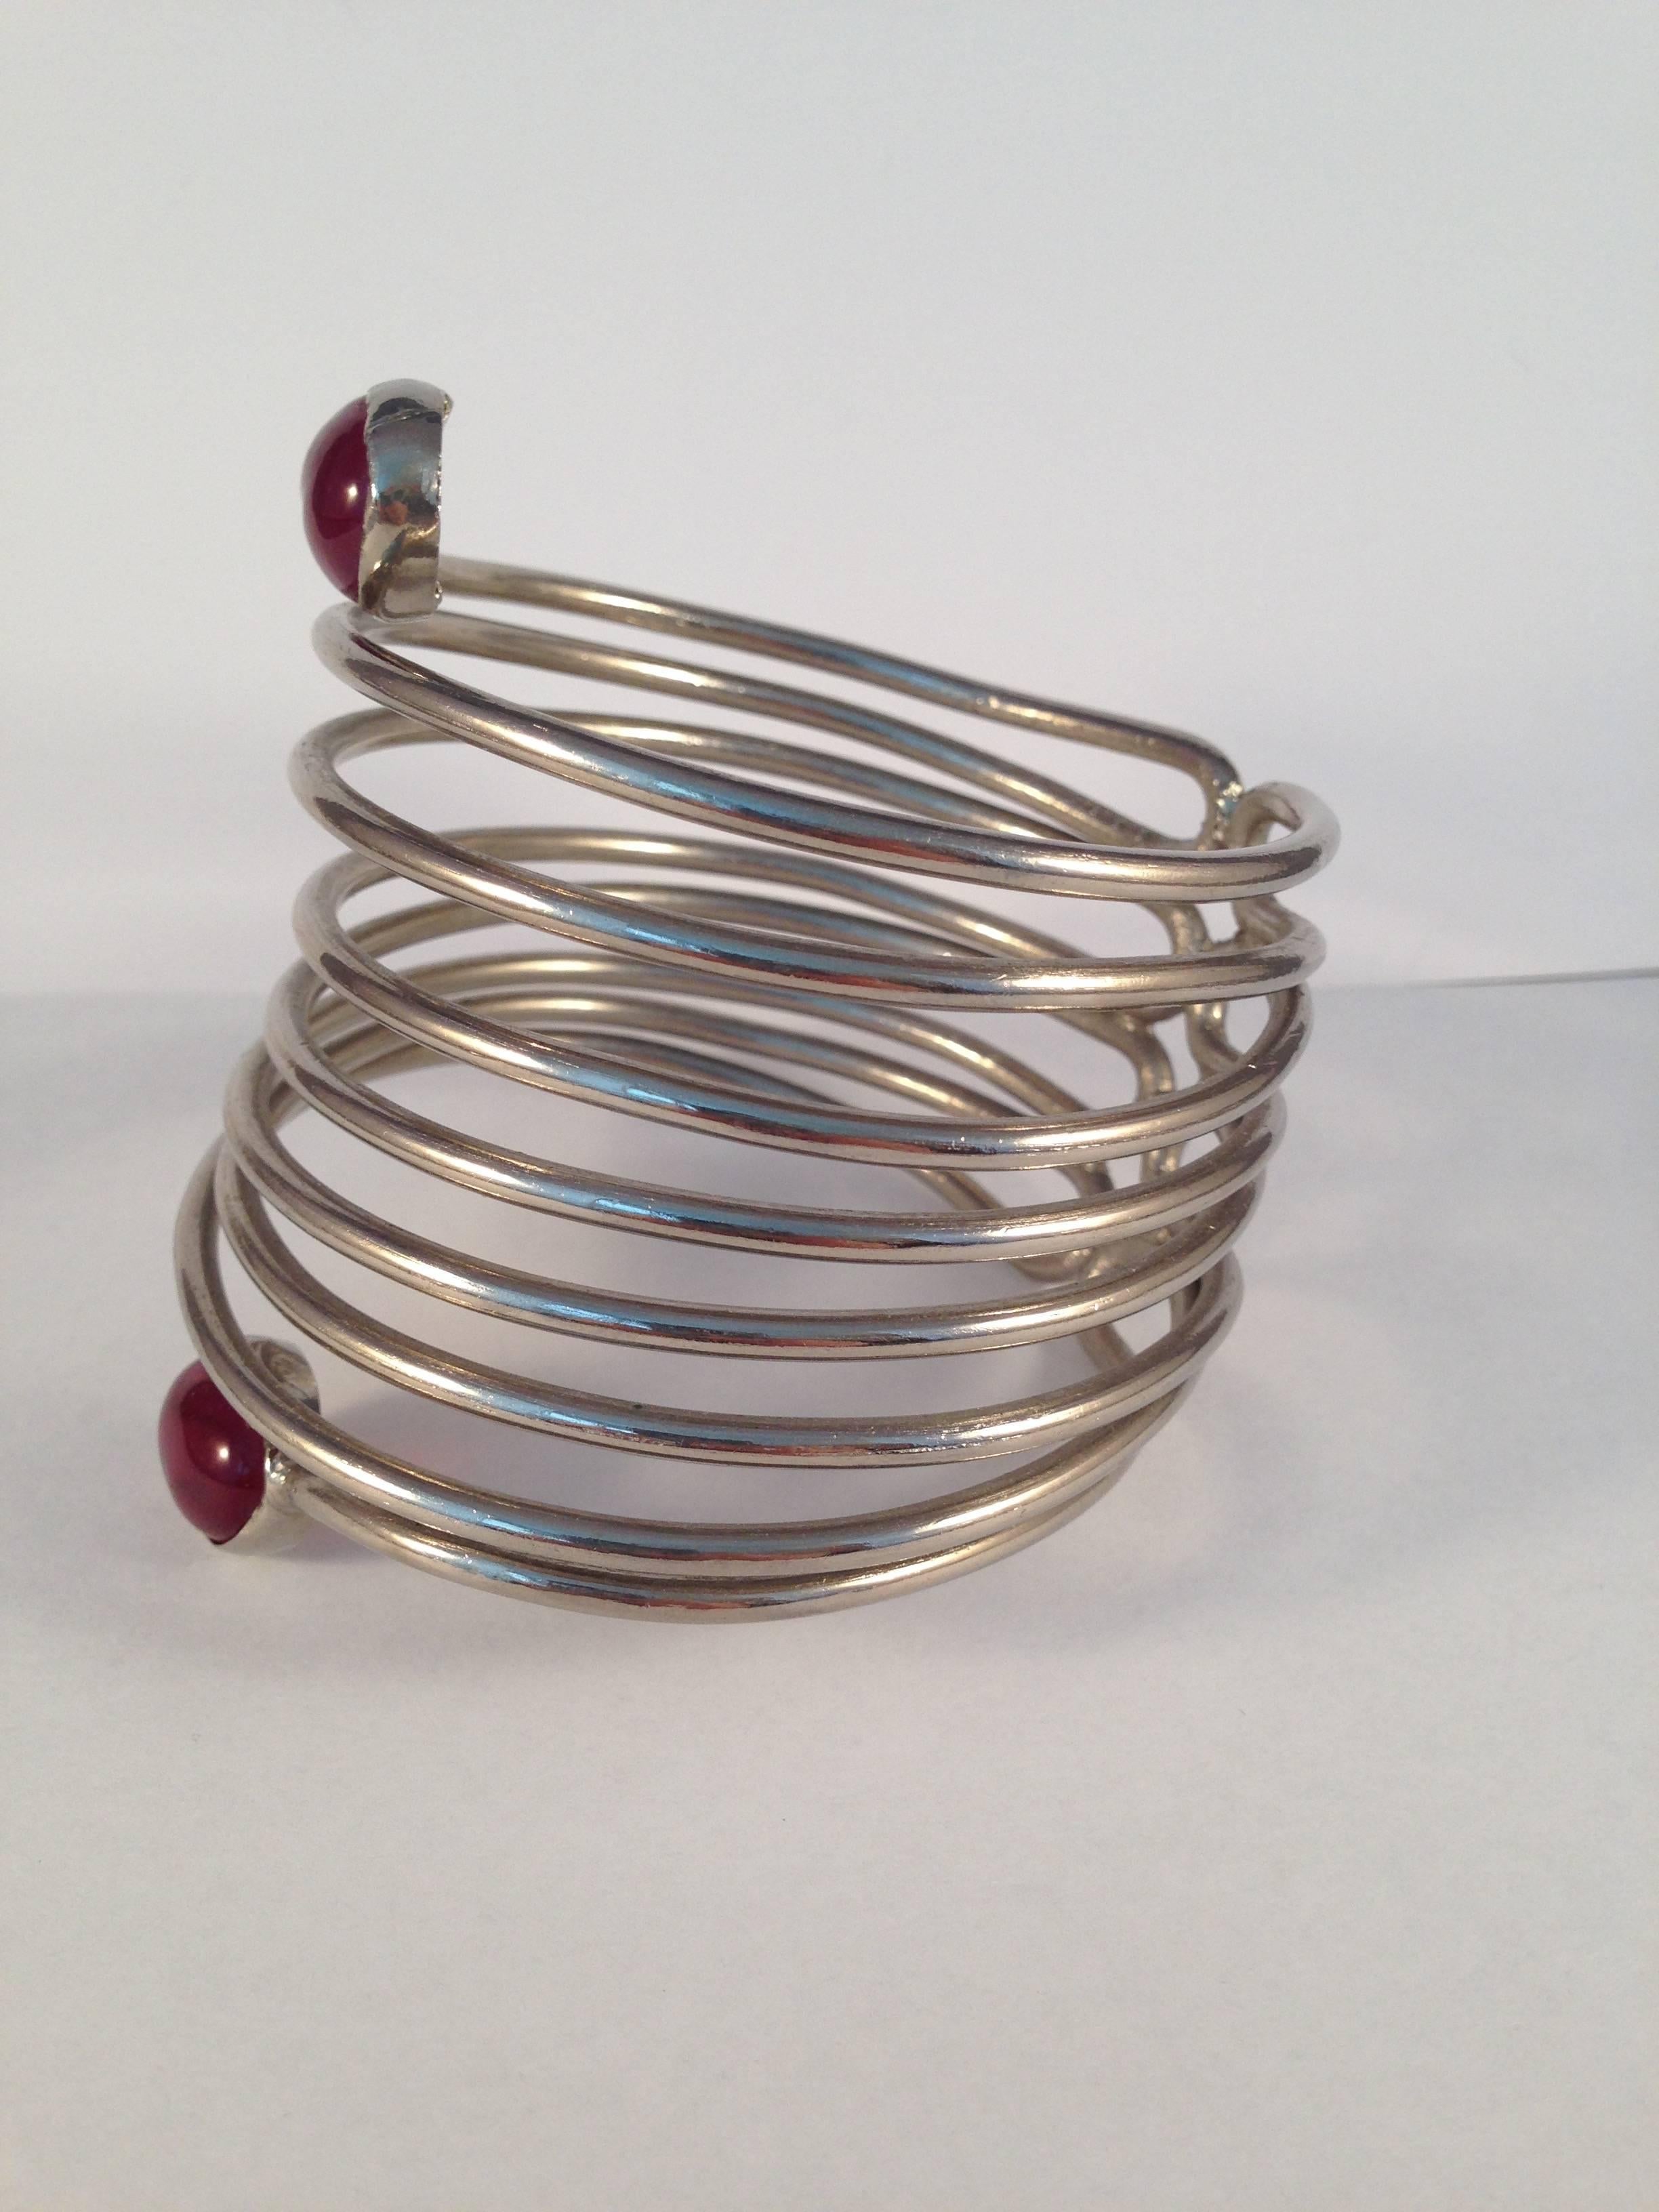 This unique 1970s Yves Saint Laurent silver-tone spiral cuff bracelet is a stunner and measures 3" tall. It features a spiral design with hand poured red gripoix glass at each end. The diameter of the bracelet is 2 3/4". It is marked